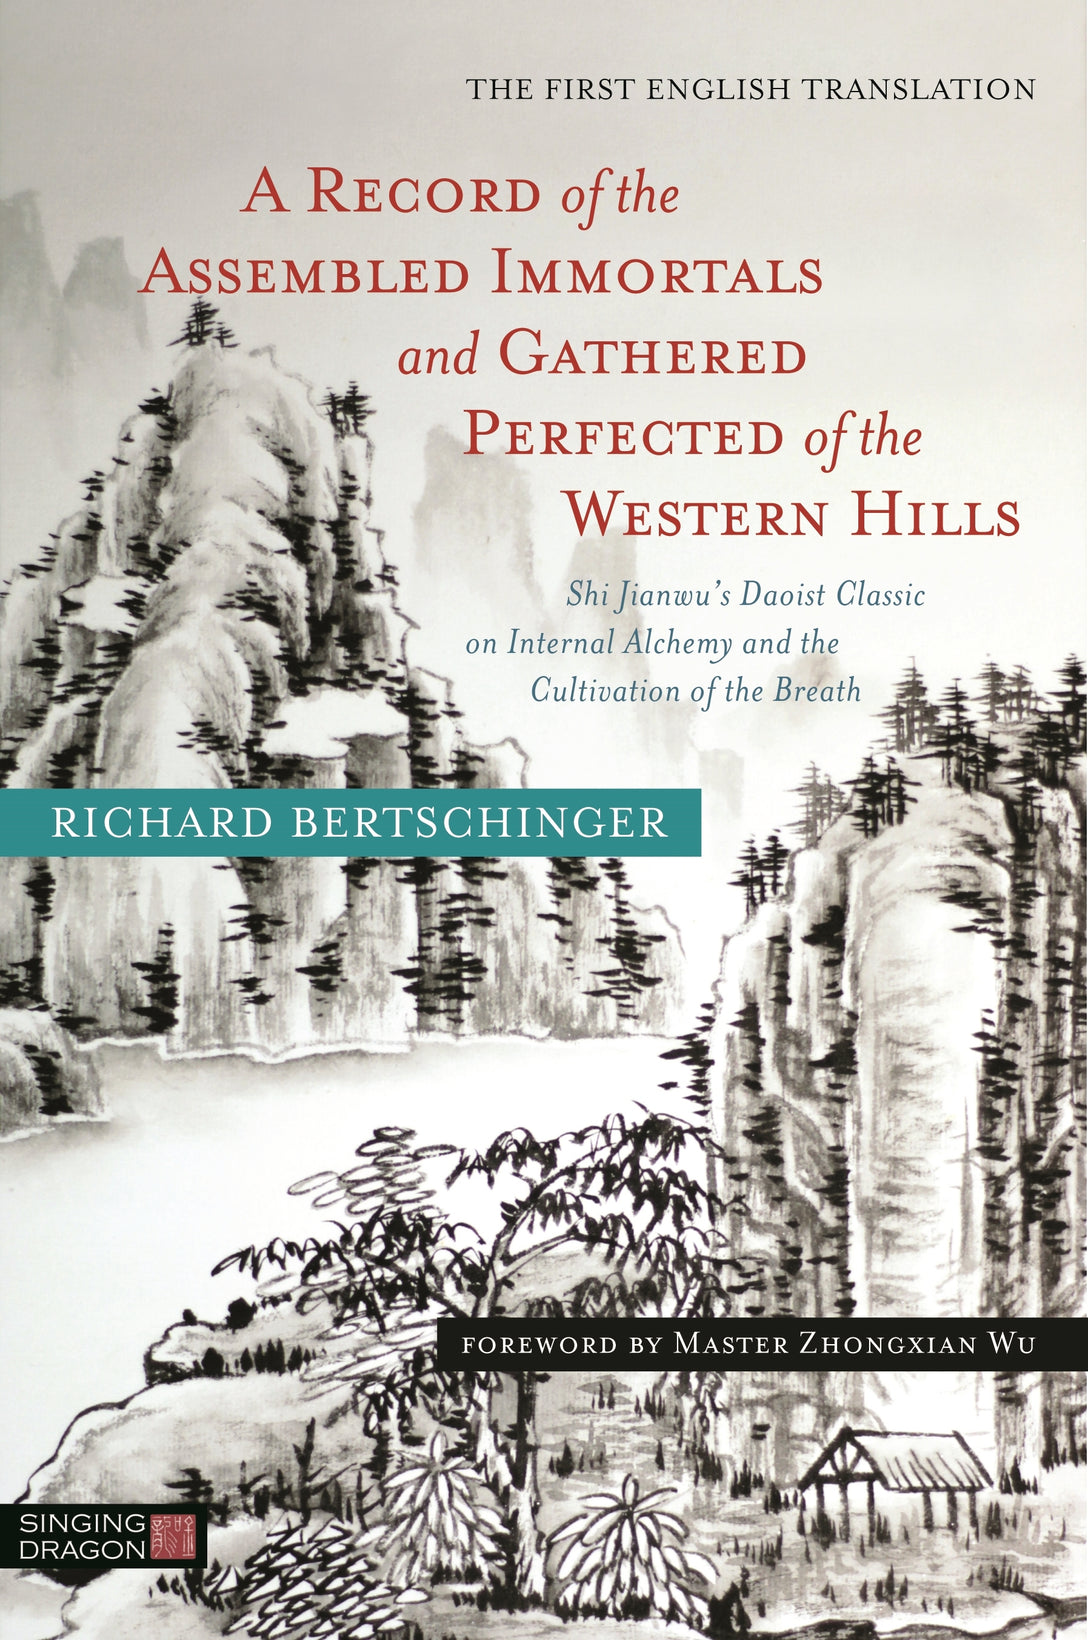 A Record of the Assembled Immortals and Gathered Perfected of the Western Hills by Zhongxian Wu, Richard Bertschinger